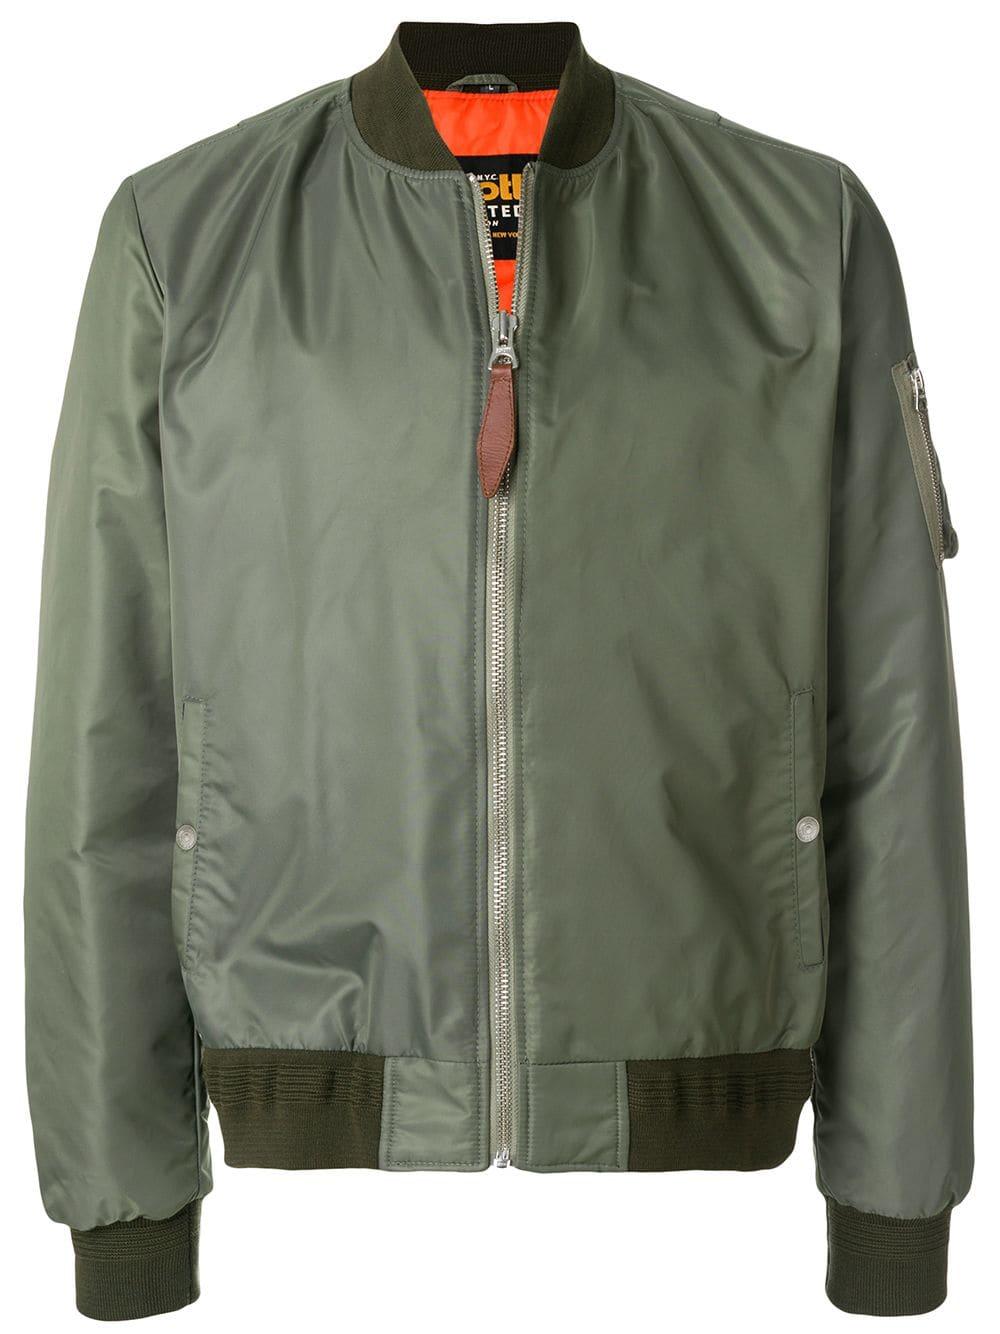 Schott Nyc Synthetic Classic Bomber Jacket in Green for Men - Lyst